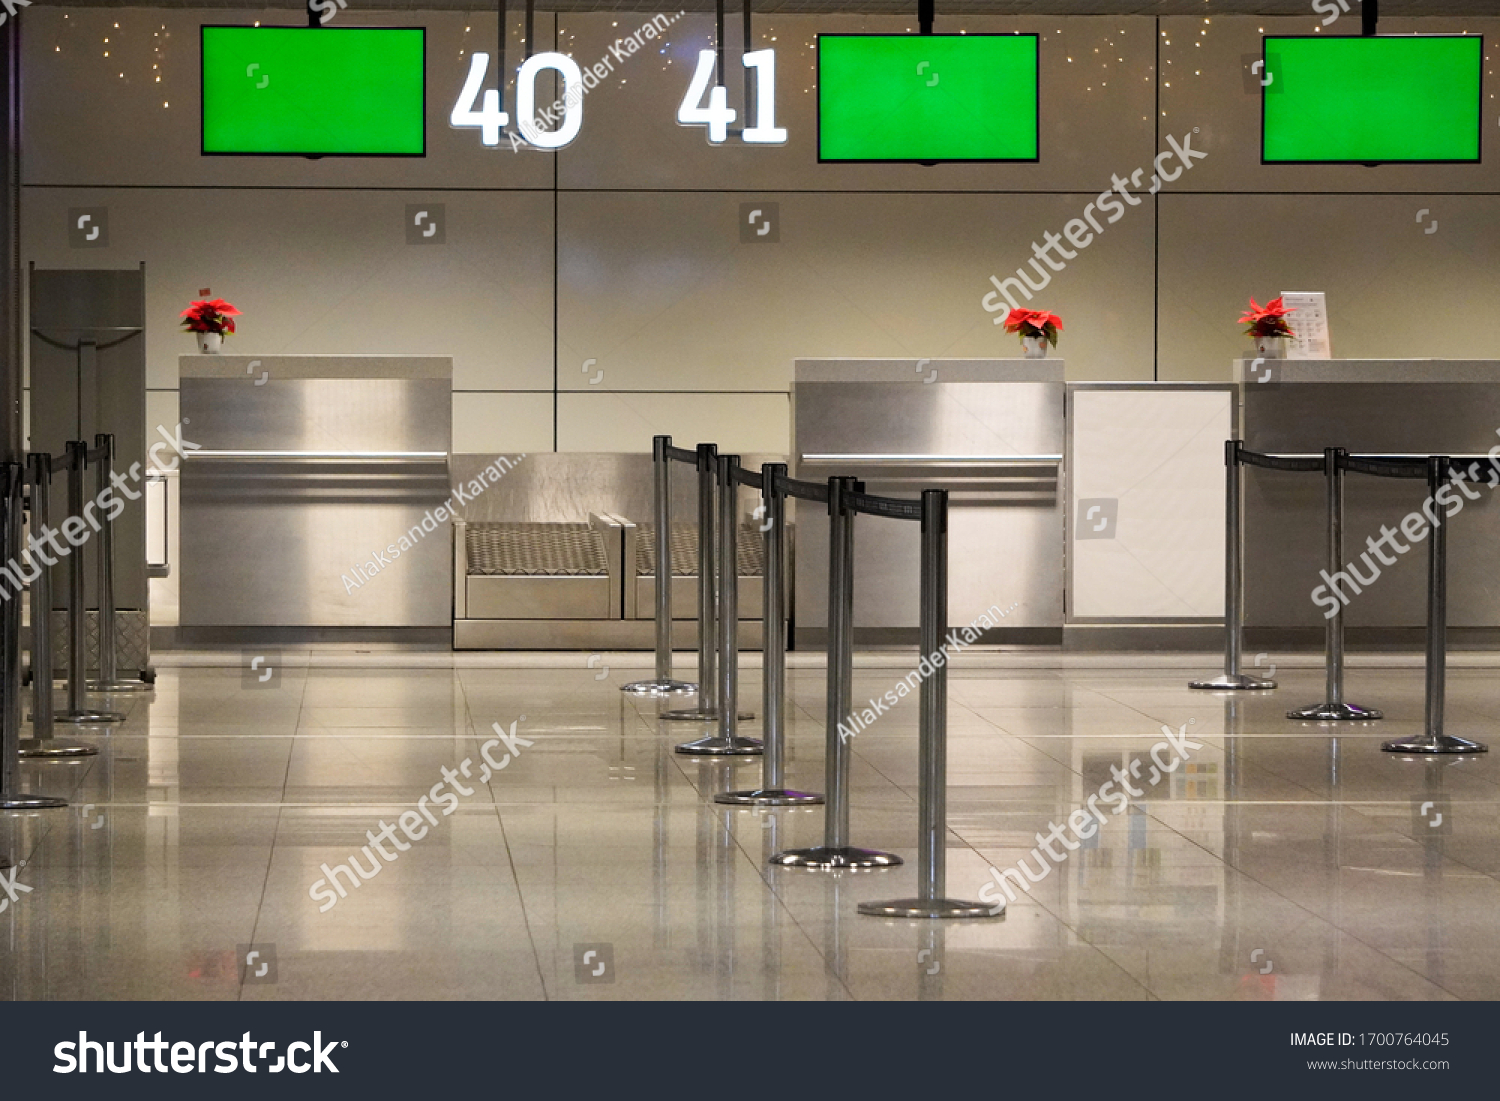 Empty airport. Empty international airport check-in counters during the COVID-19 coronavirus pandemic. No people. The private airport. Loss of civil aviation revenue. #1700764045